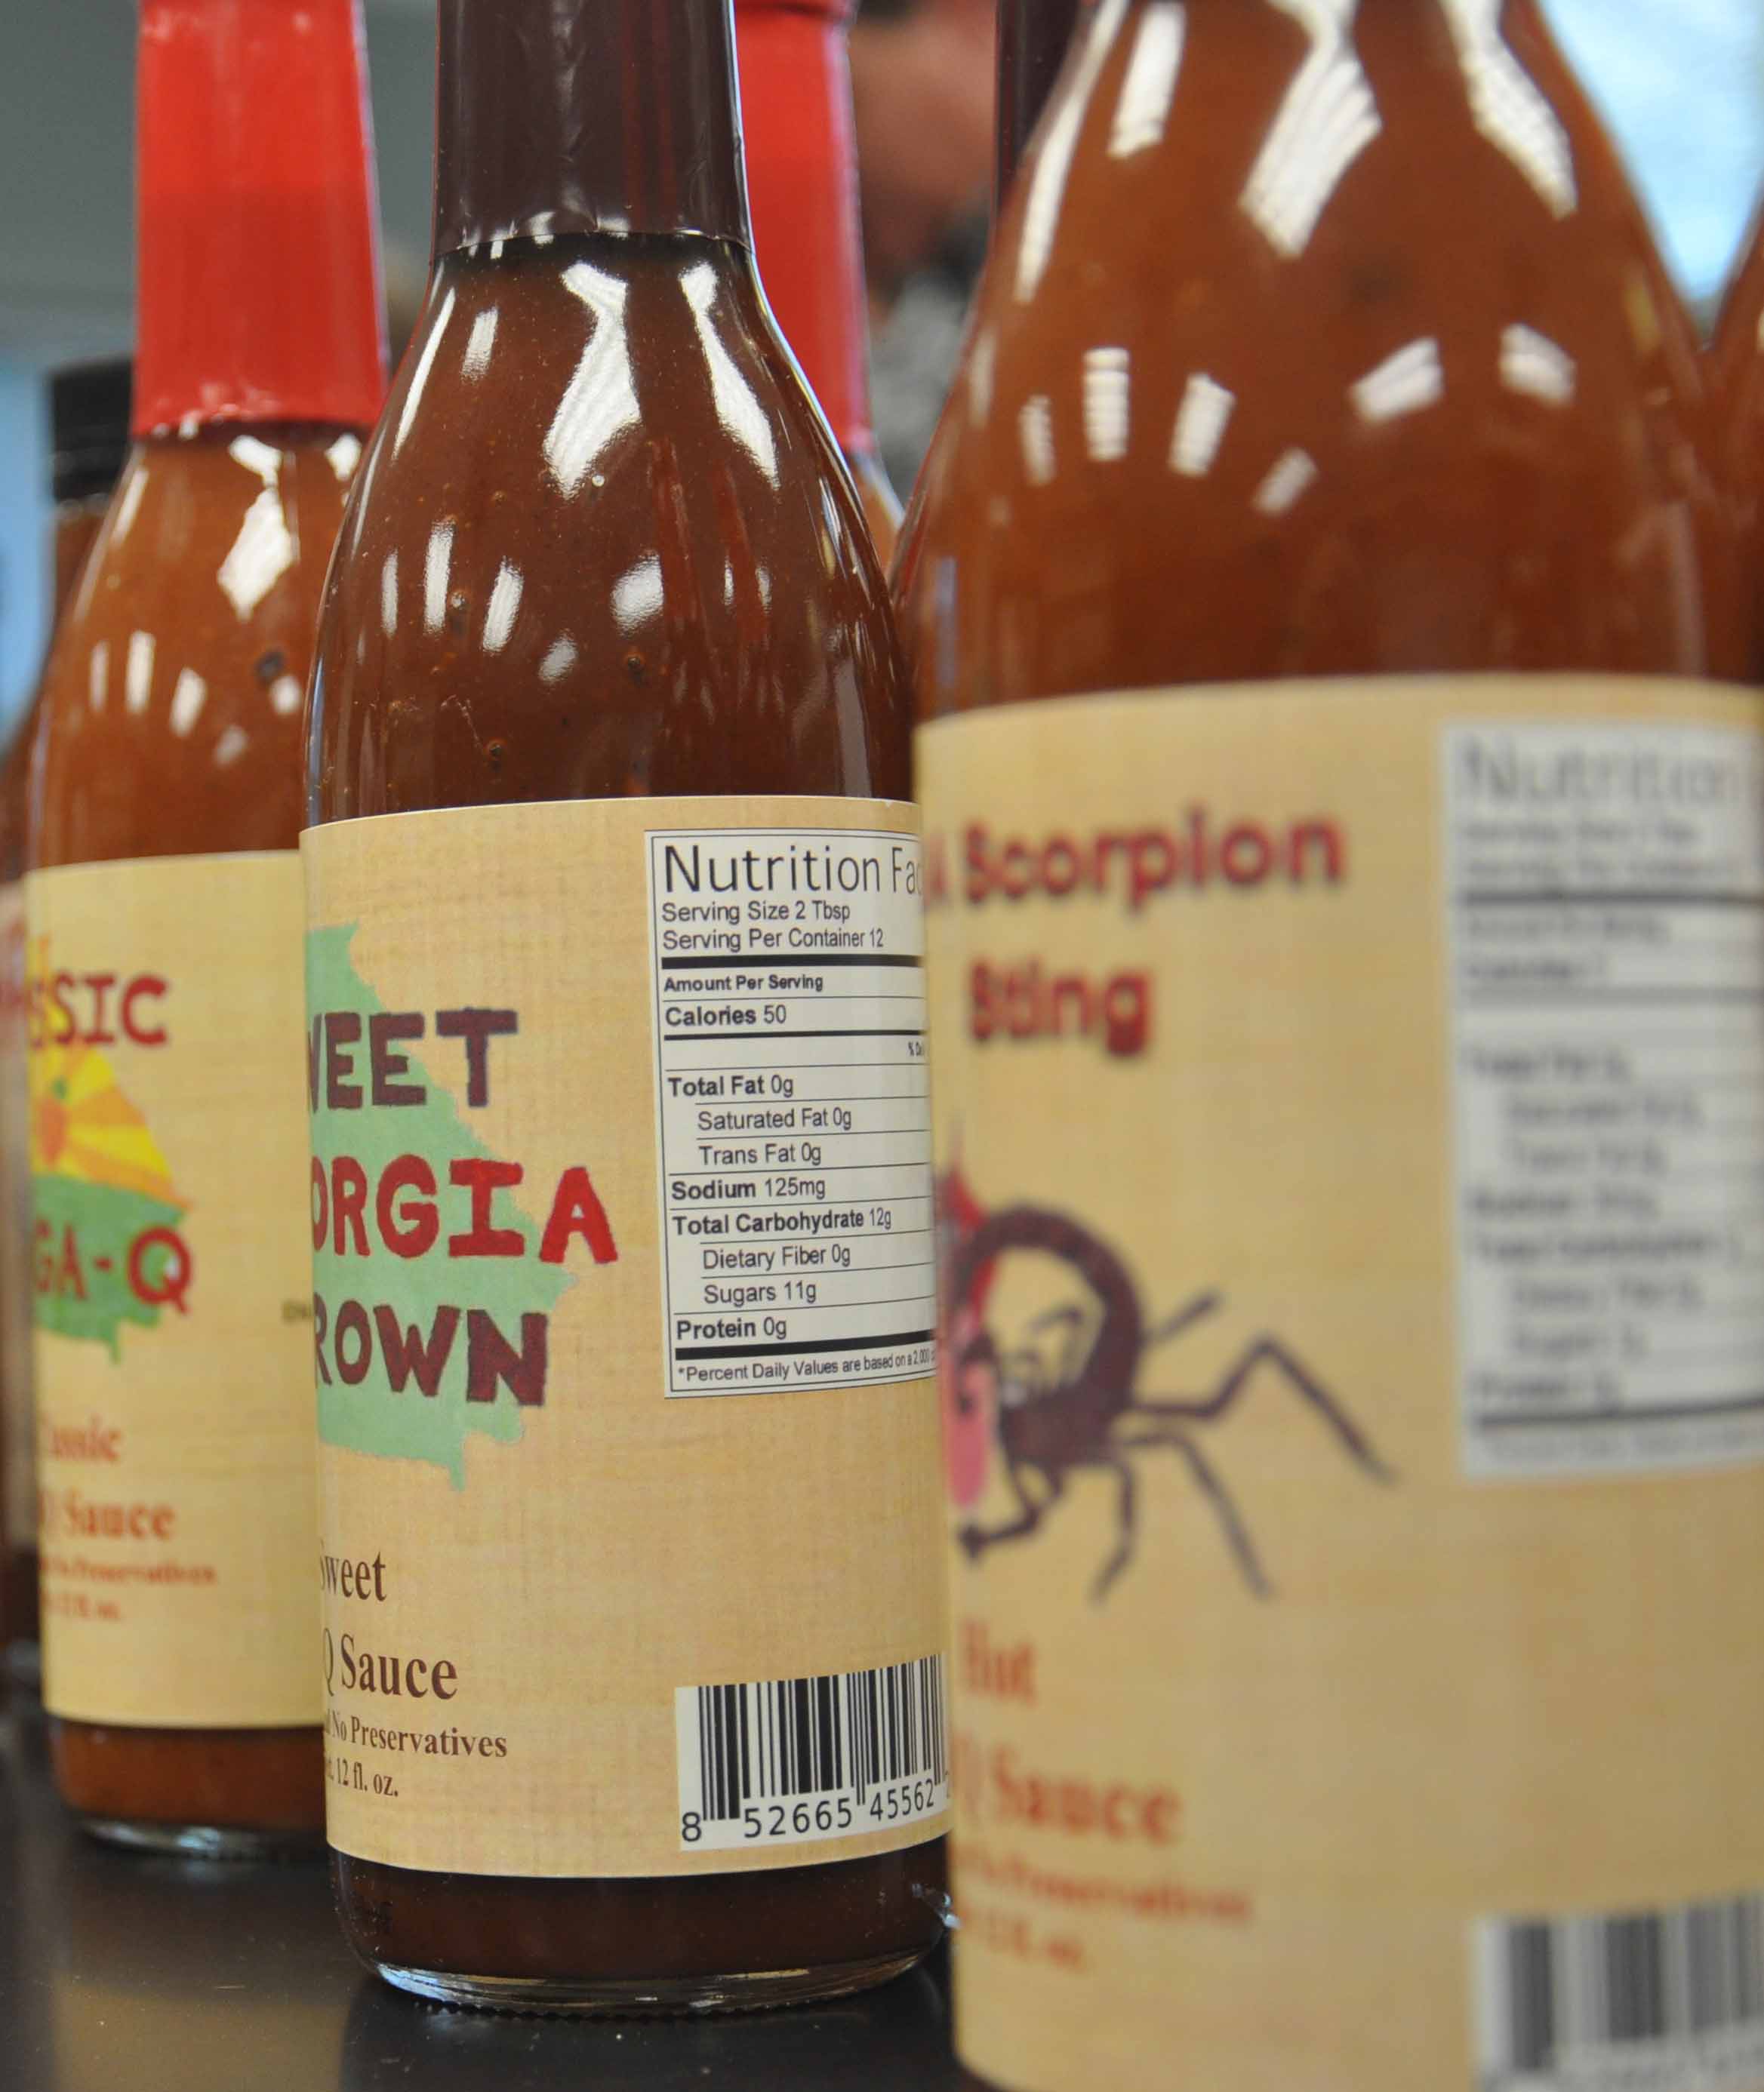 More than 20 barbecue sauces alone were submitted to the 2014 Flavor of Georgia Food Product Contest. This year saw the largest number of entries in the contest's seven year history.